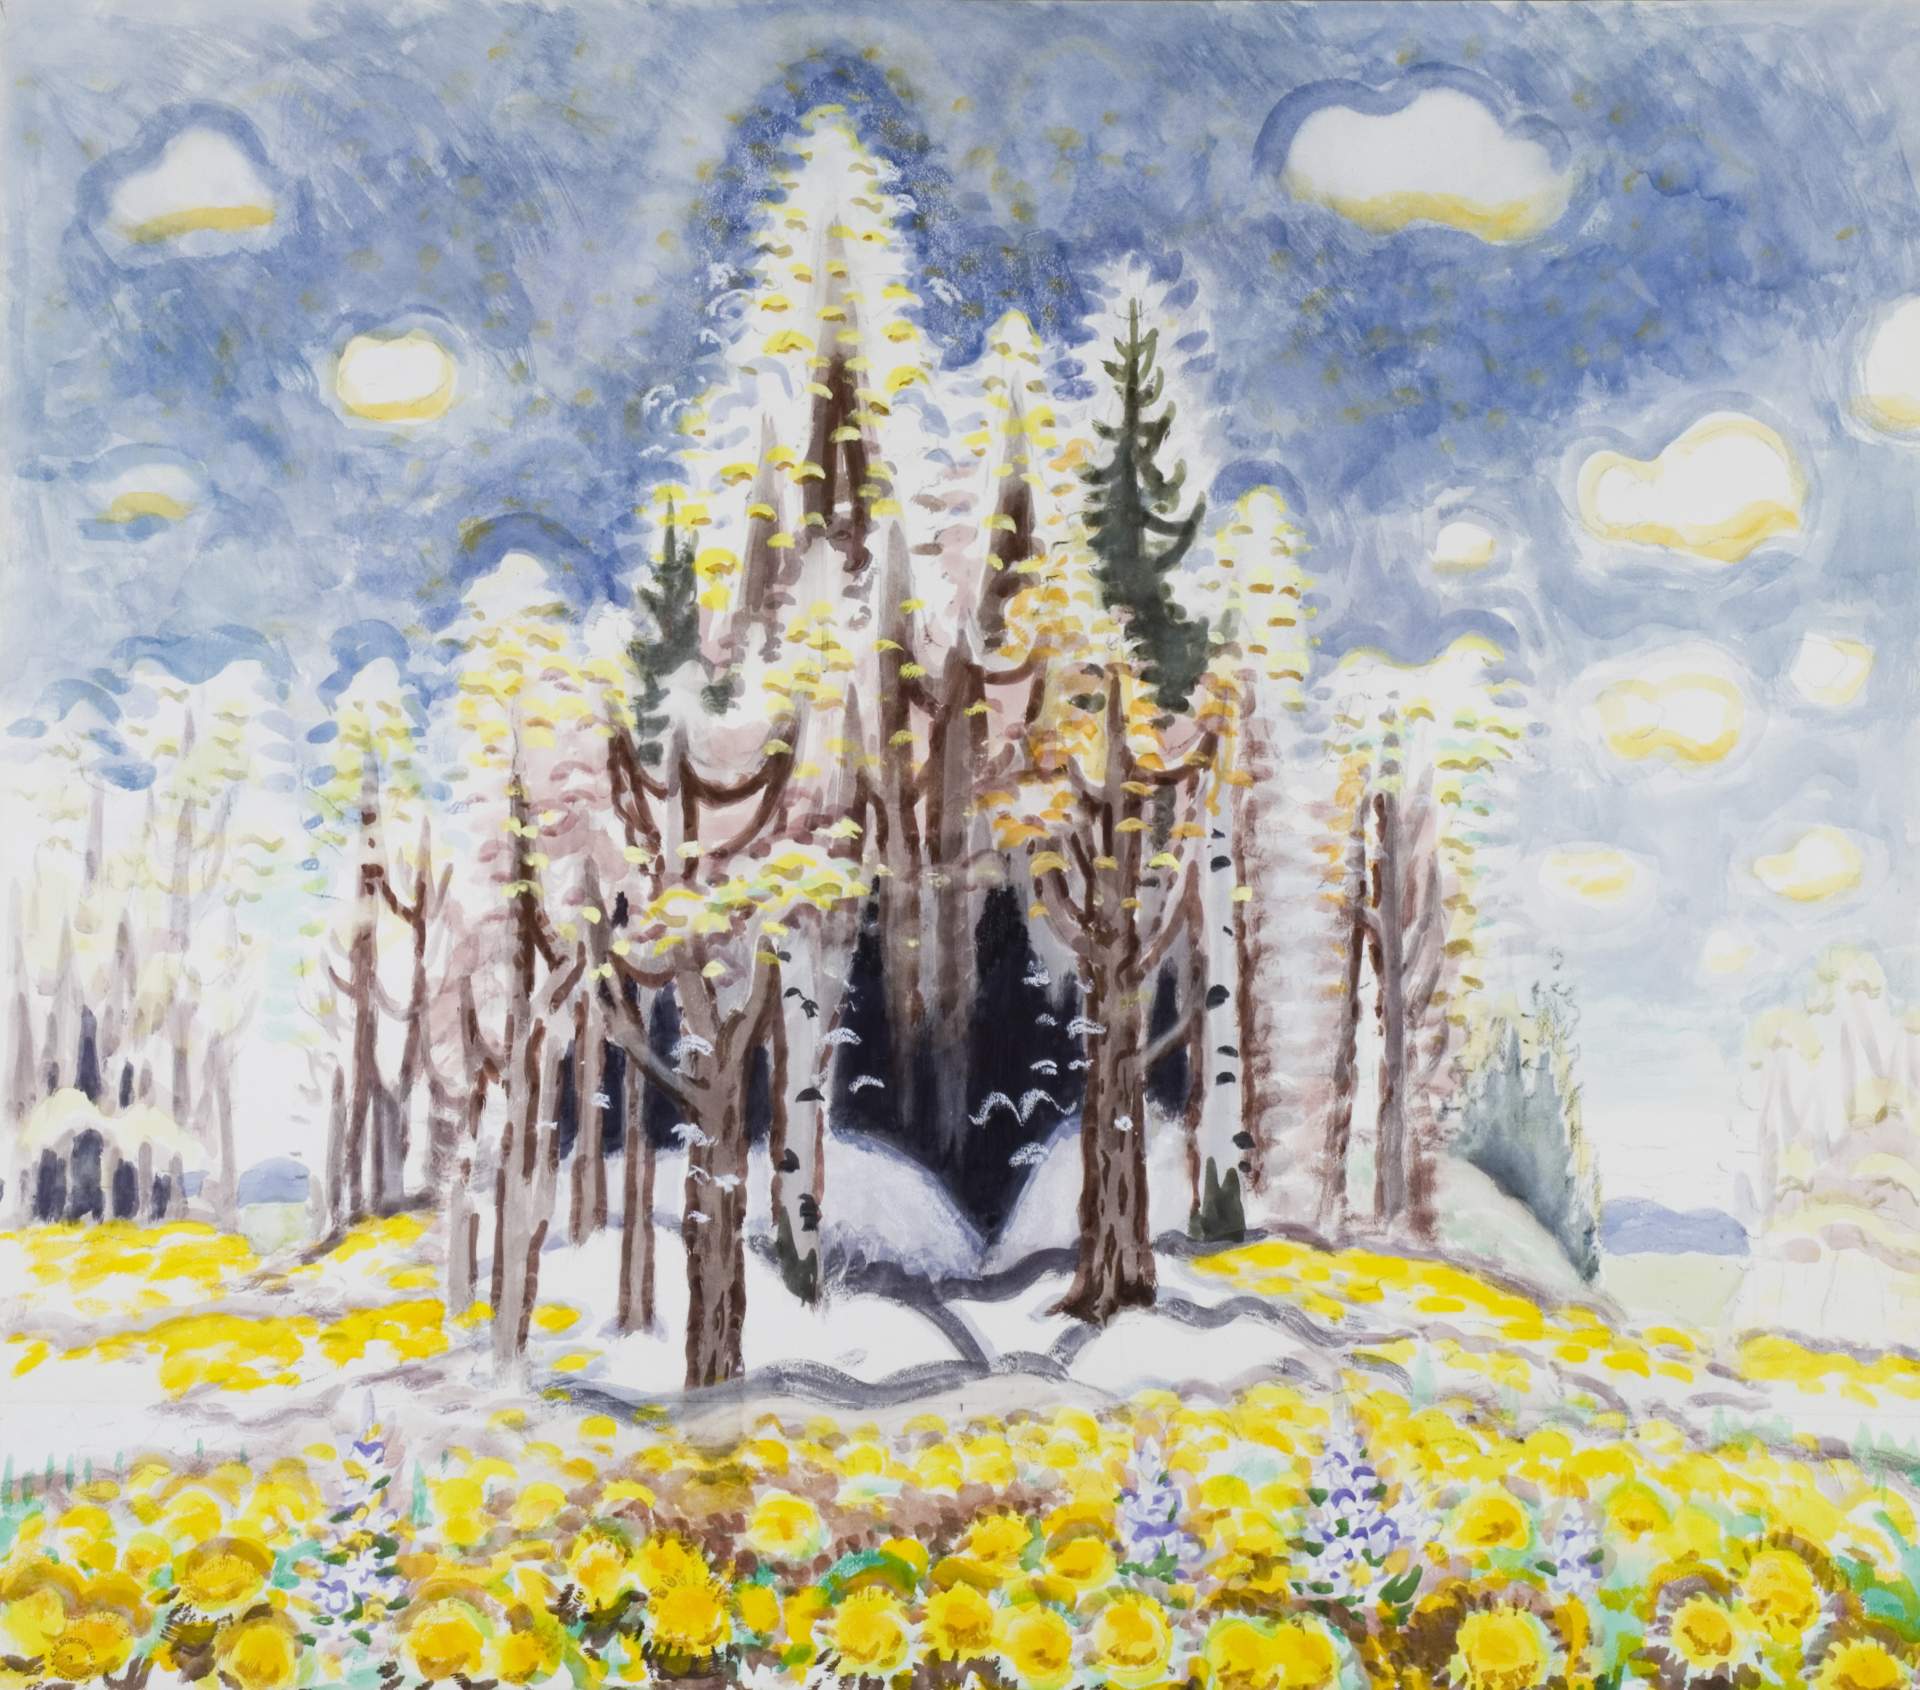 Charles Burchfield and Me Part II by Philip Koch